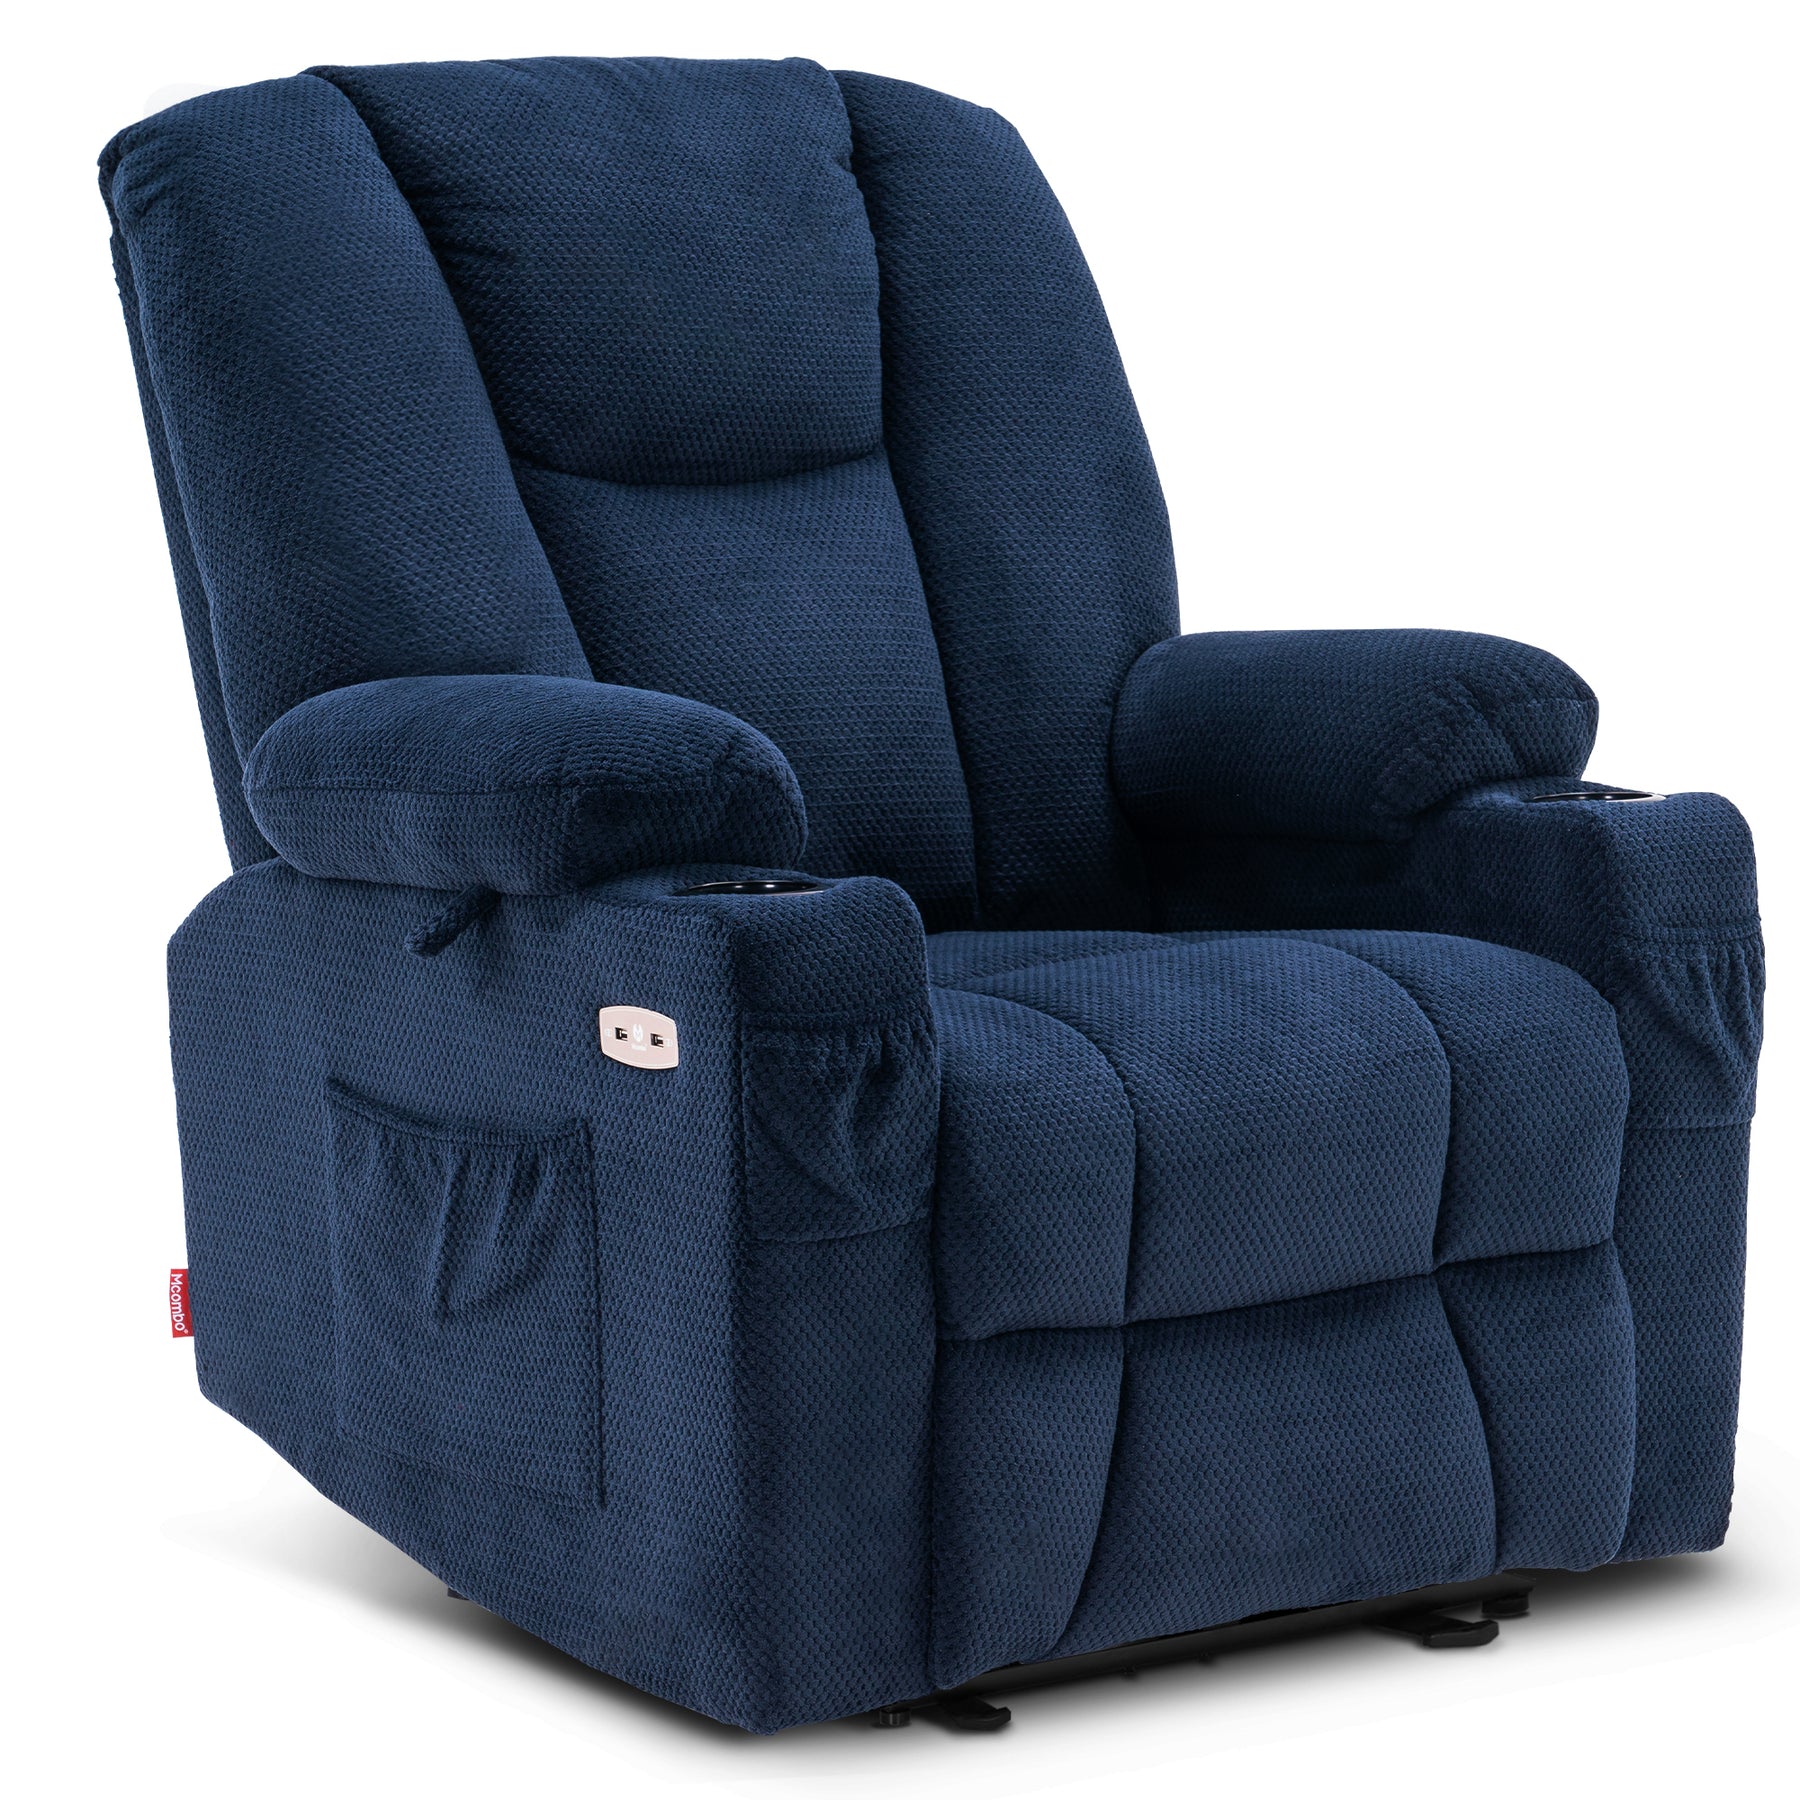 Mcombo Electric Power Recliner Chair with Massage & Heat, Extended Footrest, USB Ports, Side Pockets, Cup Holders, Fabric 8015